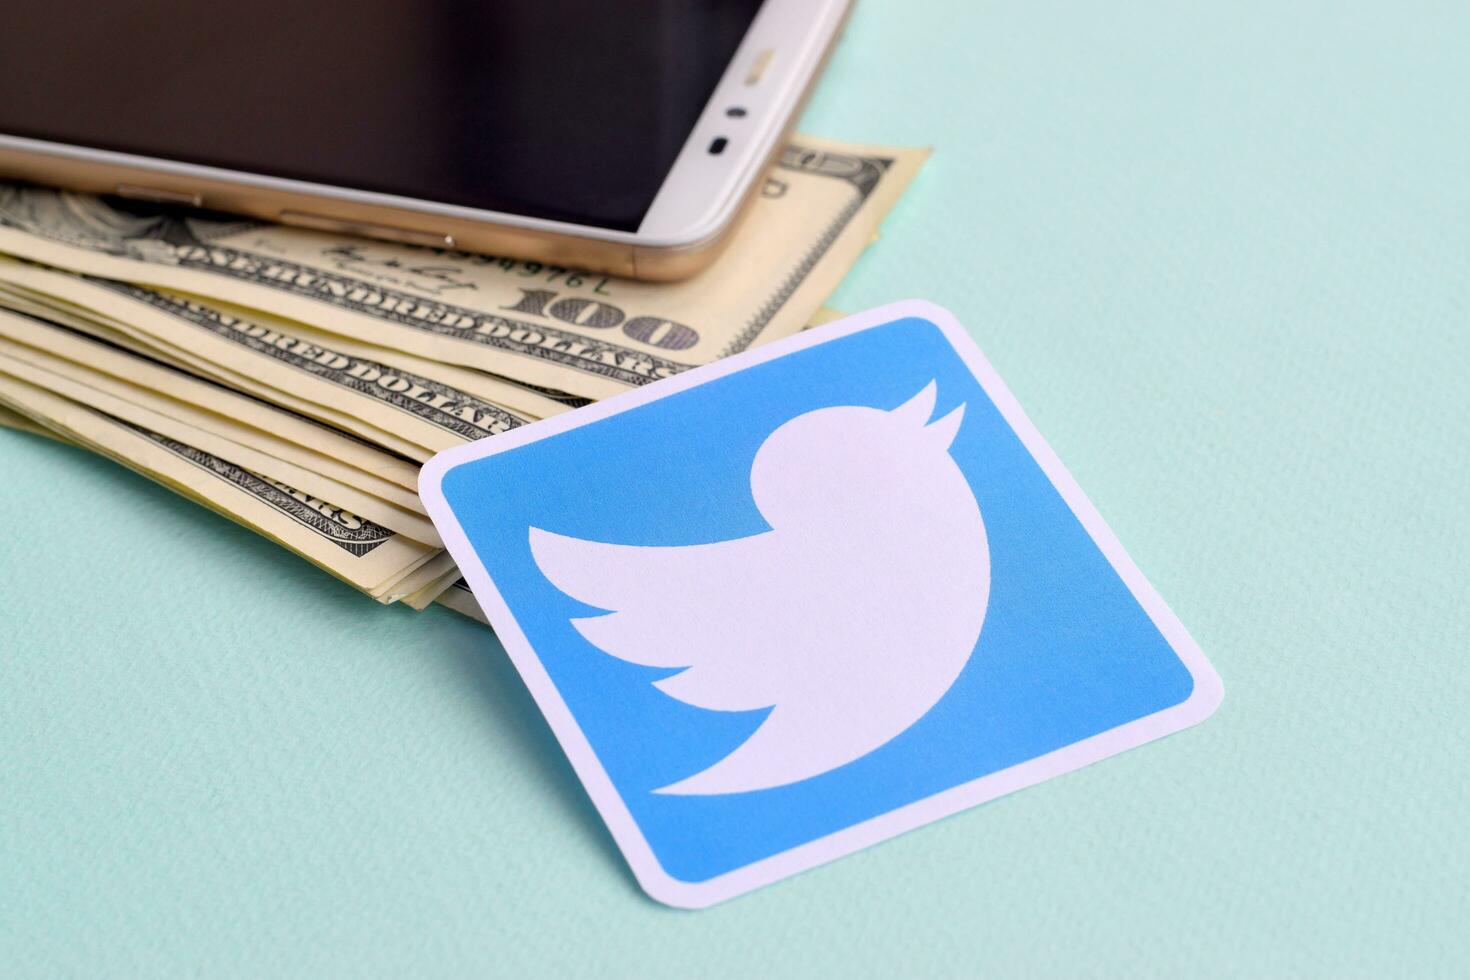 Twitter paper logo lies with envelope full of dollar bills and smartphone photo